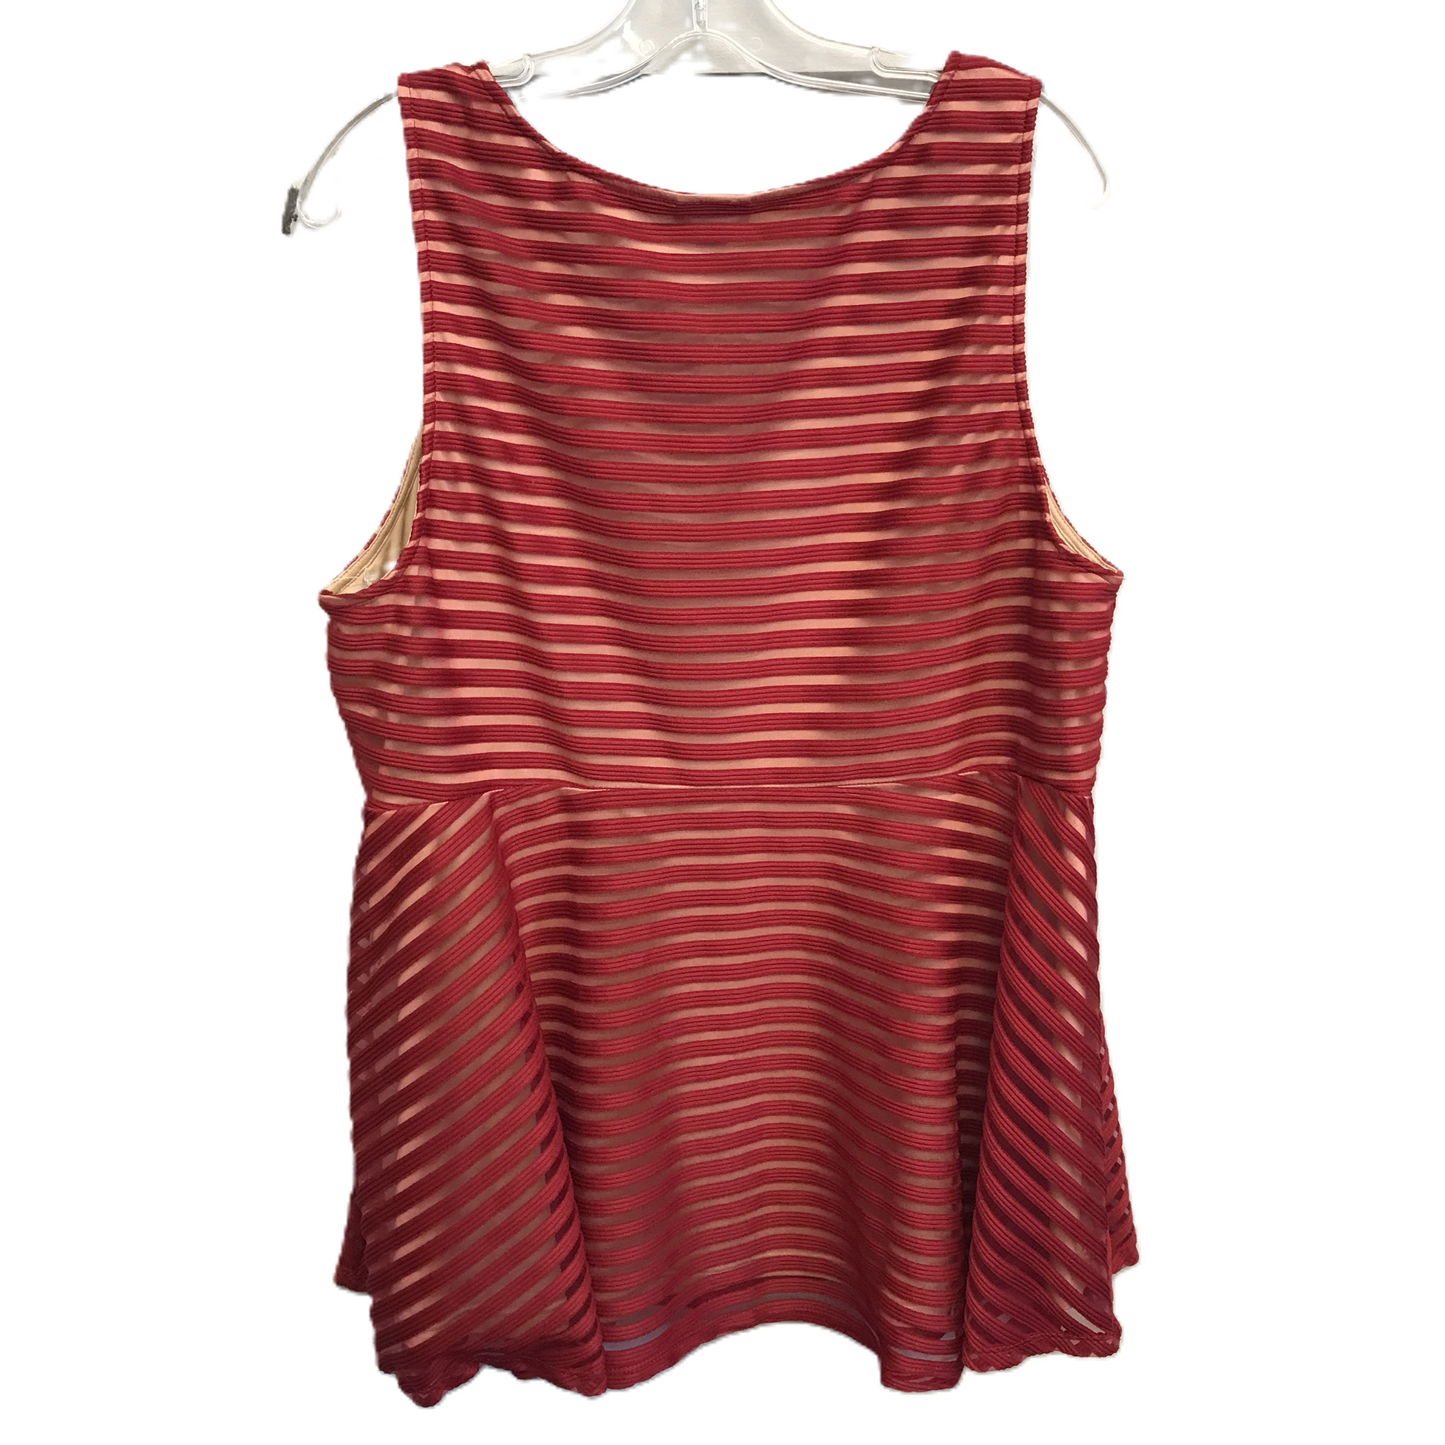 Red Top Sleeveless By Torrid, Size: 2x